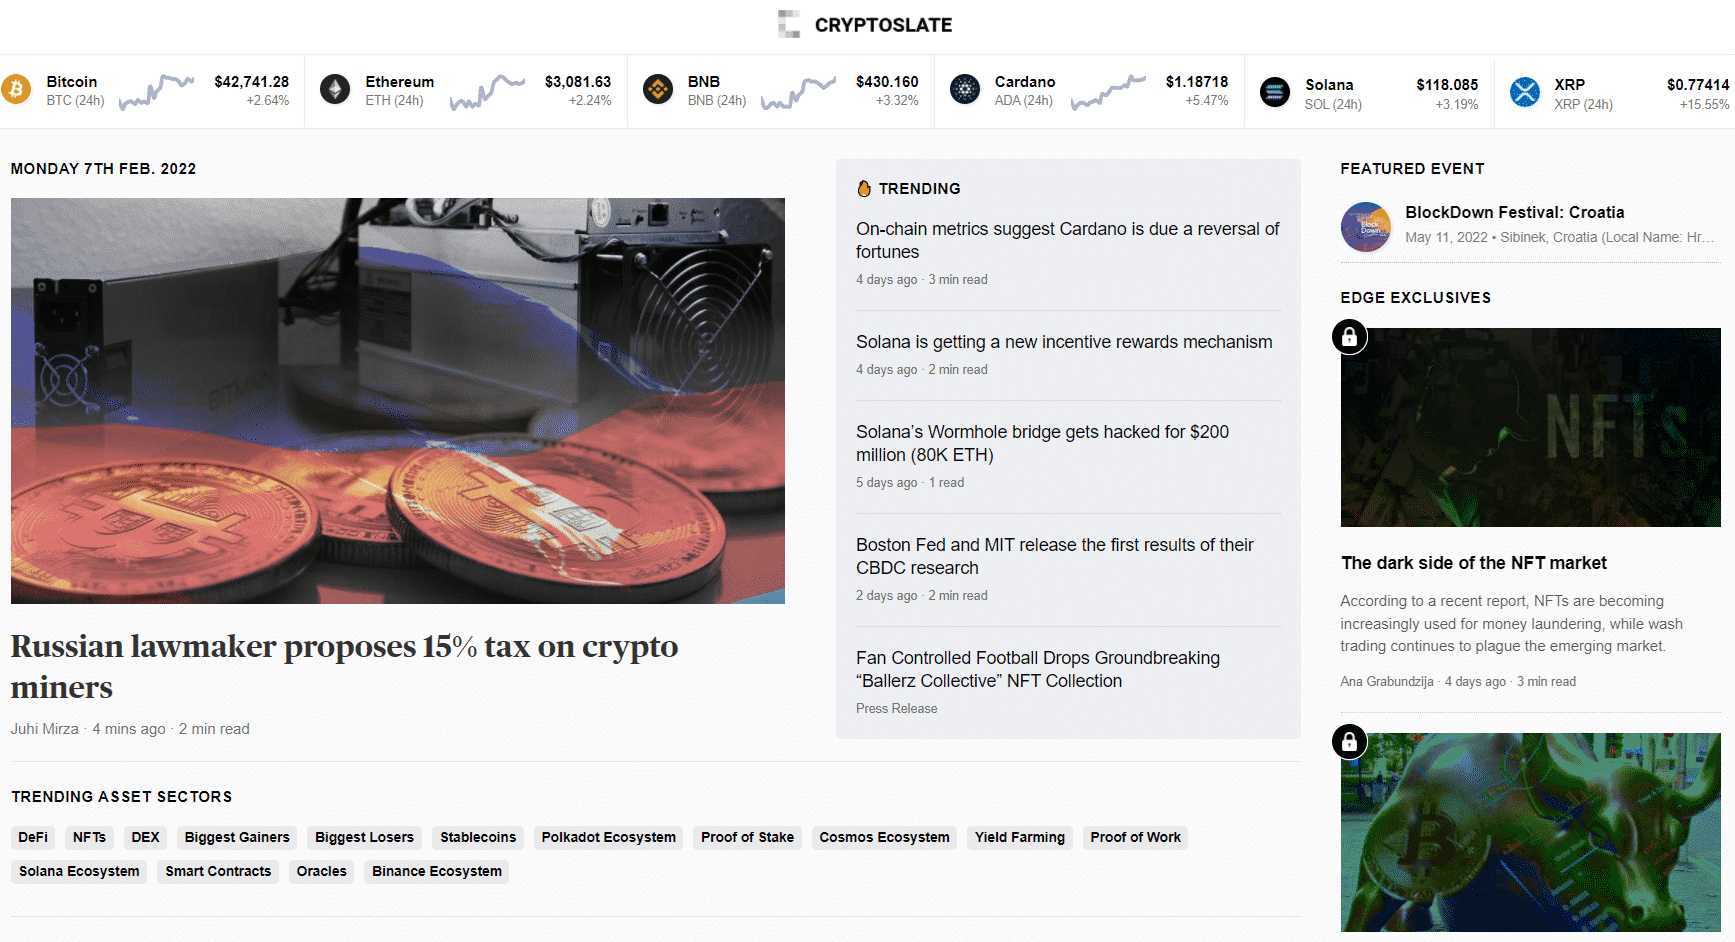 The CryptoSlate home page